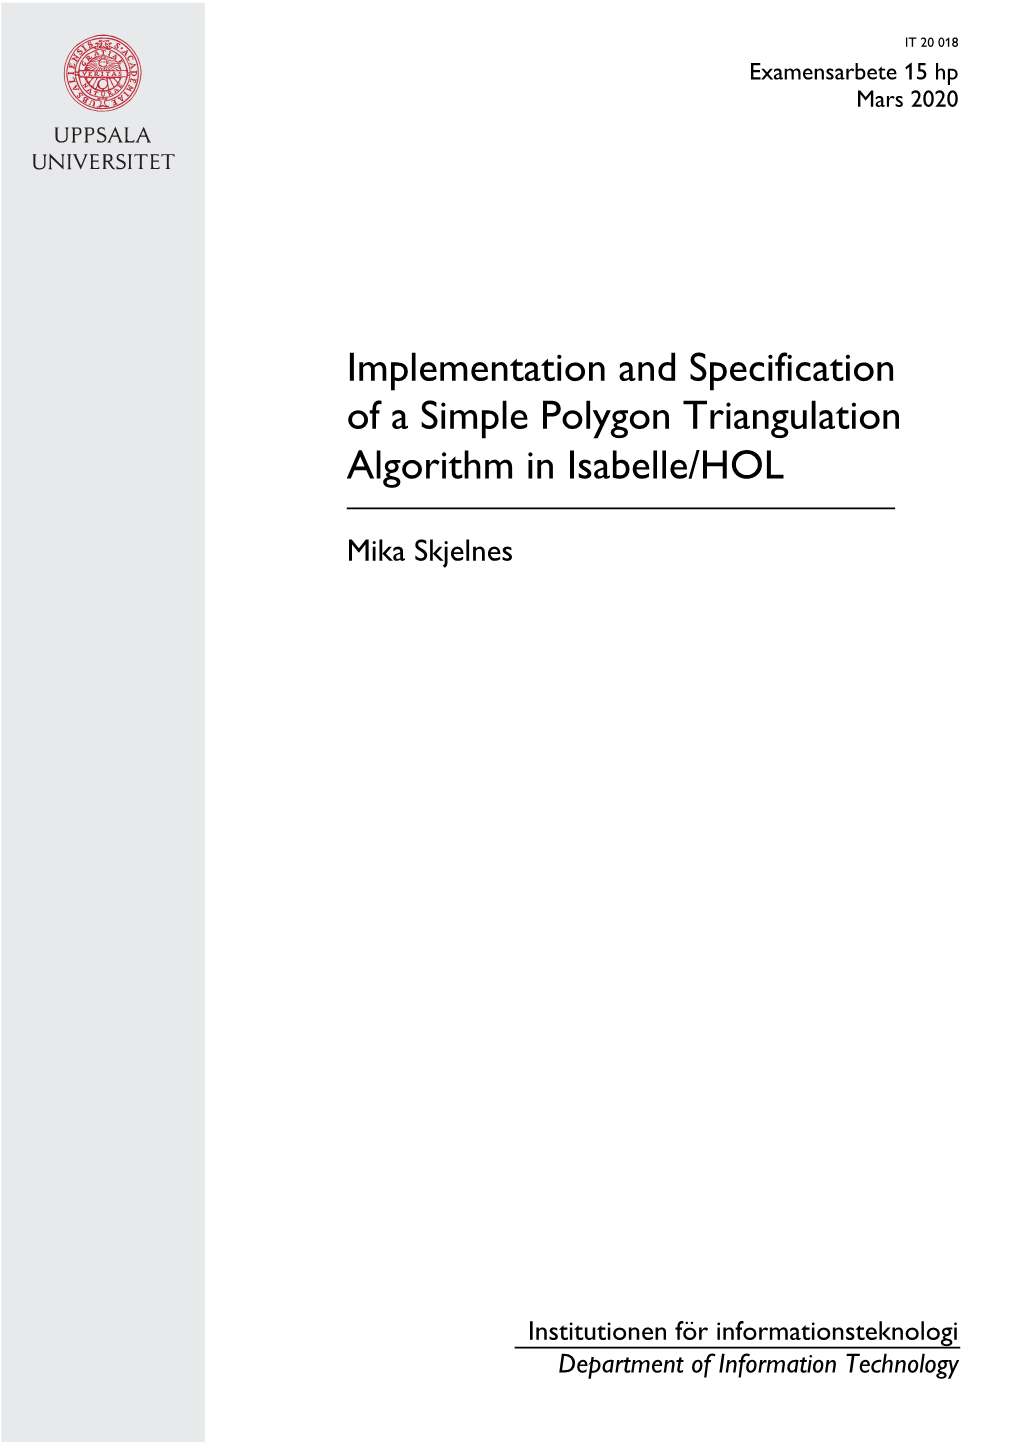 Implementation and Specification of a Simple Polygon Triangulation Algorithm in Isabelle/HOL